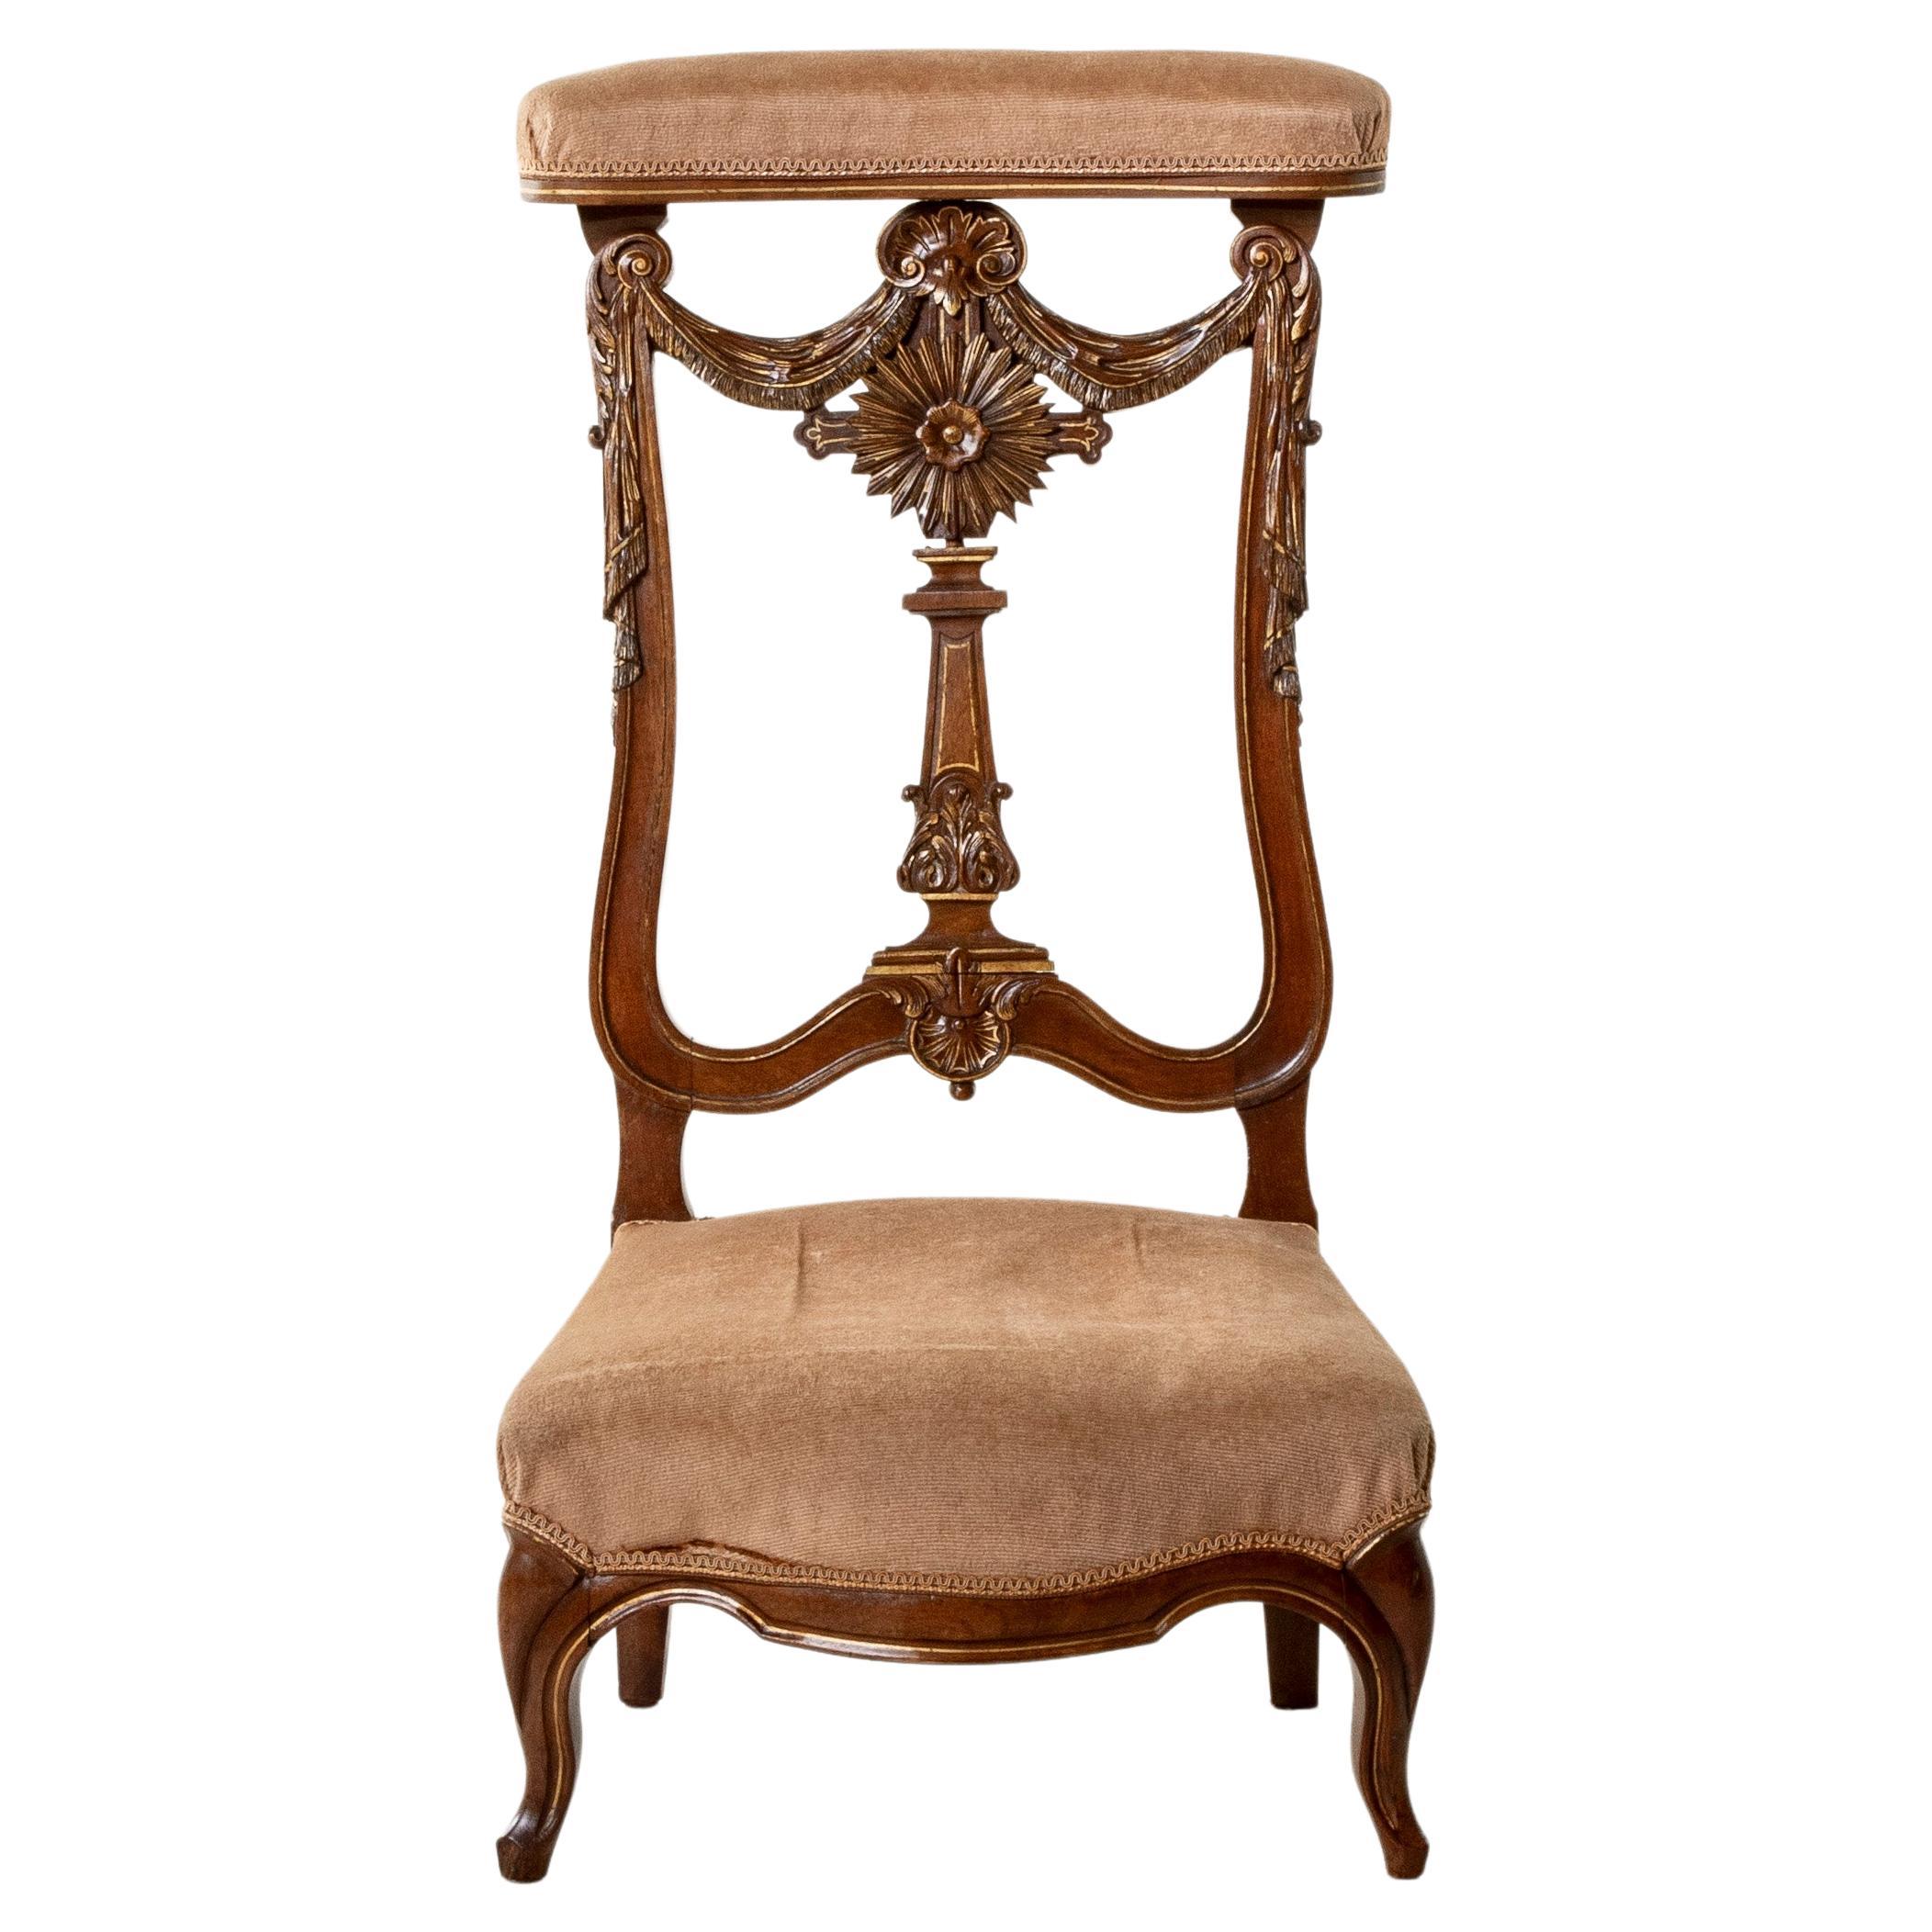 Mid-19th Century French Hand-Carved Walnut Prie Dieu or Prayer Chair For Sale